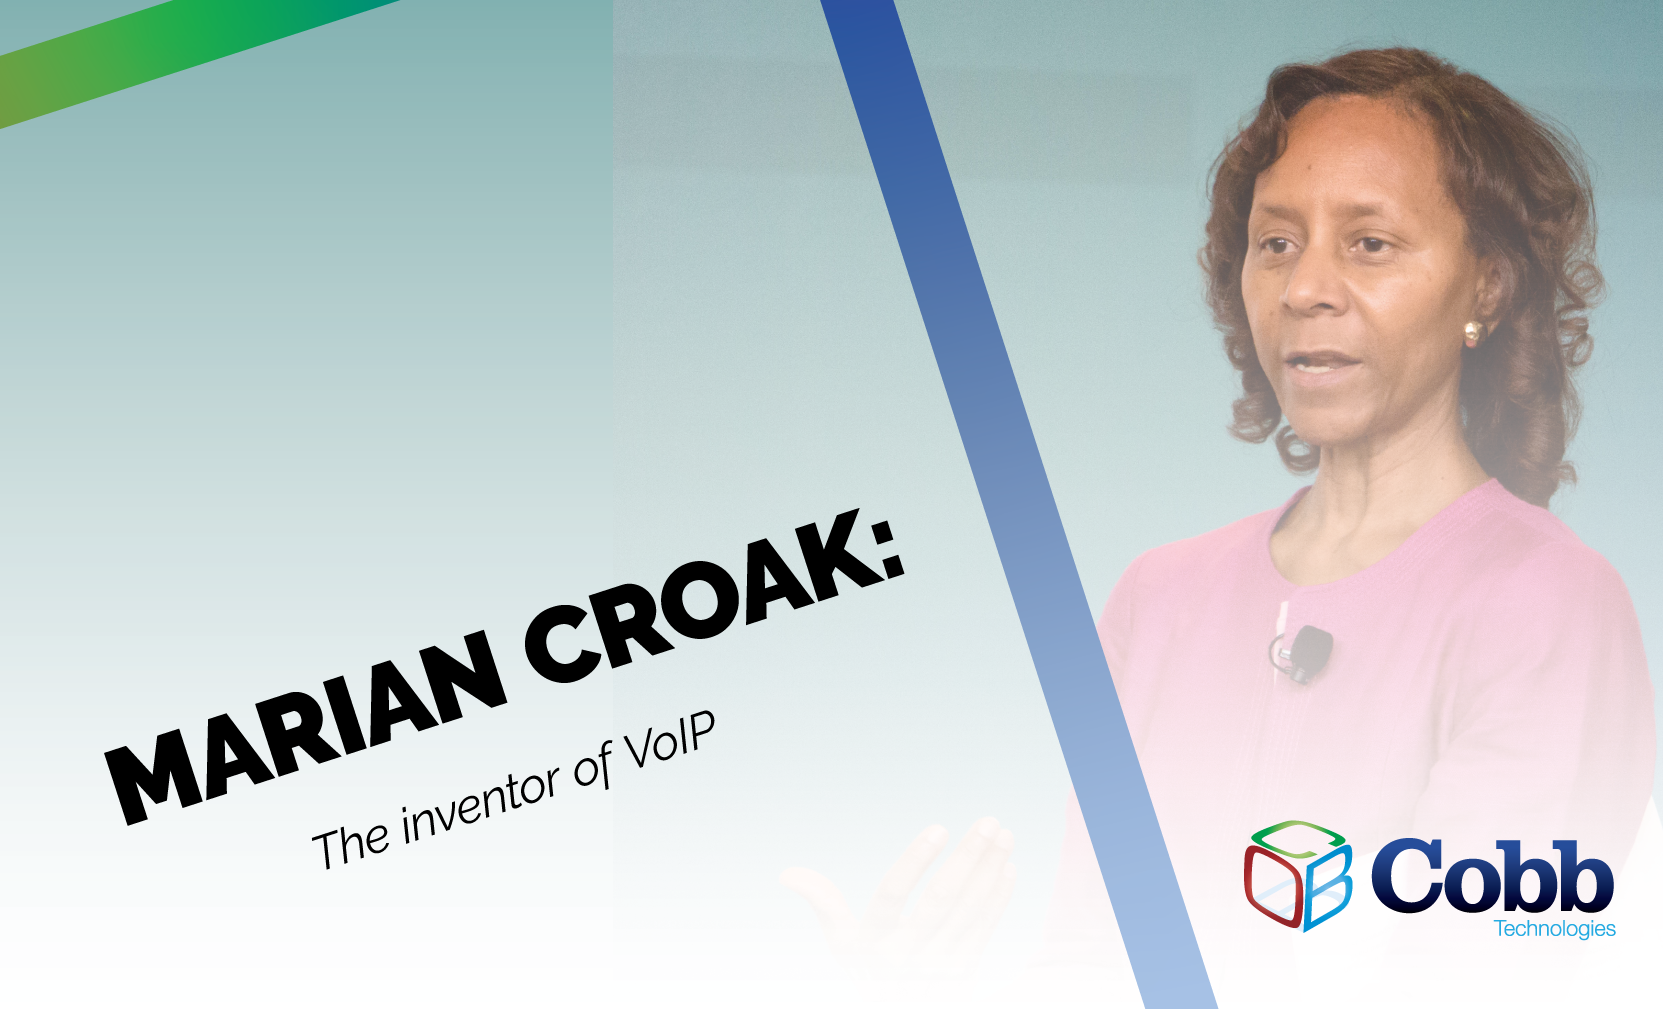 Marian Croak: The inventor of VoIP